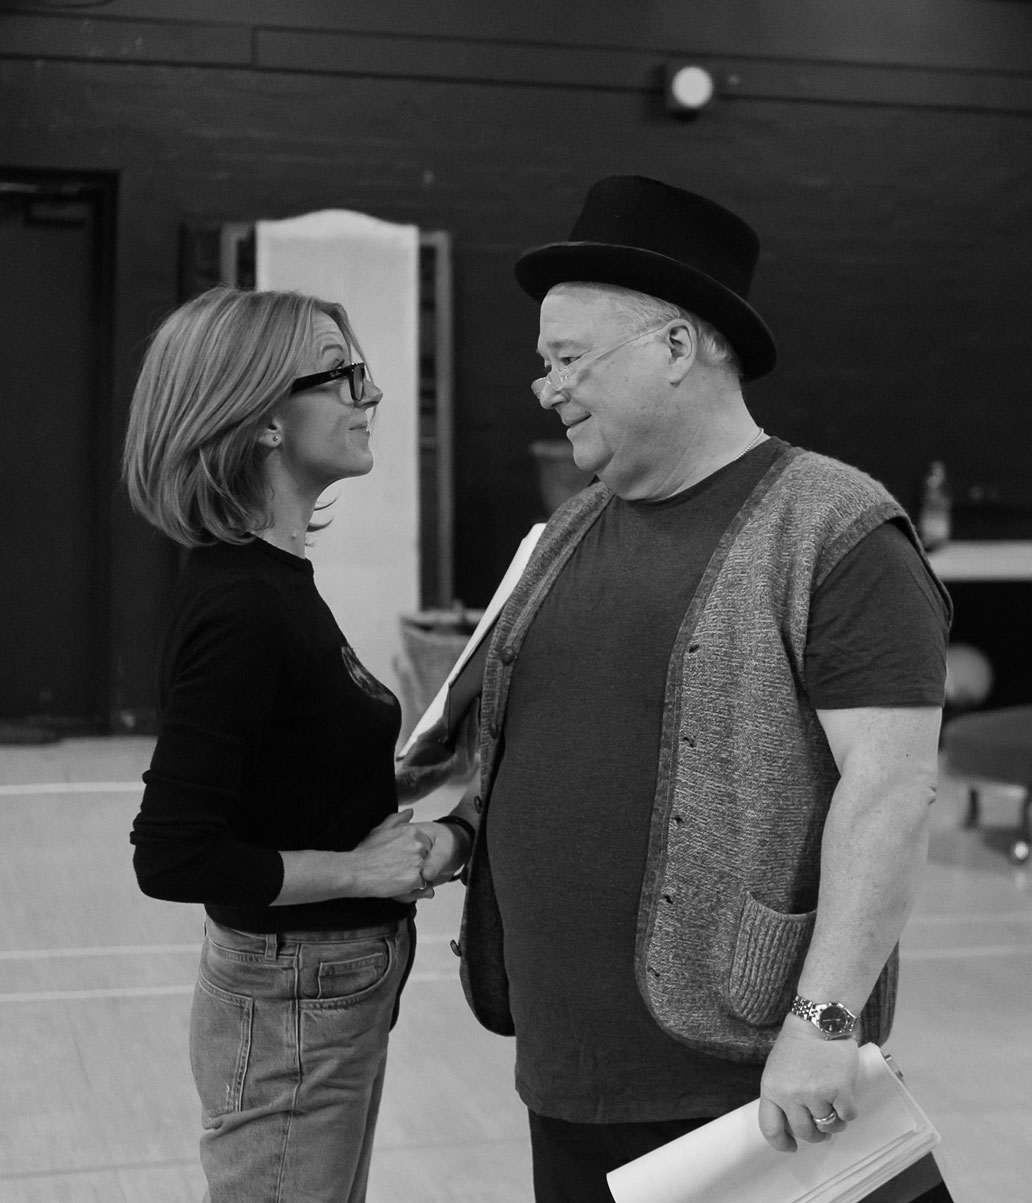 Michelle Butterly & Michael Starke. The Star in rehearsal. Photograph by Brian Roberts.